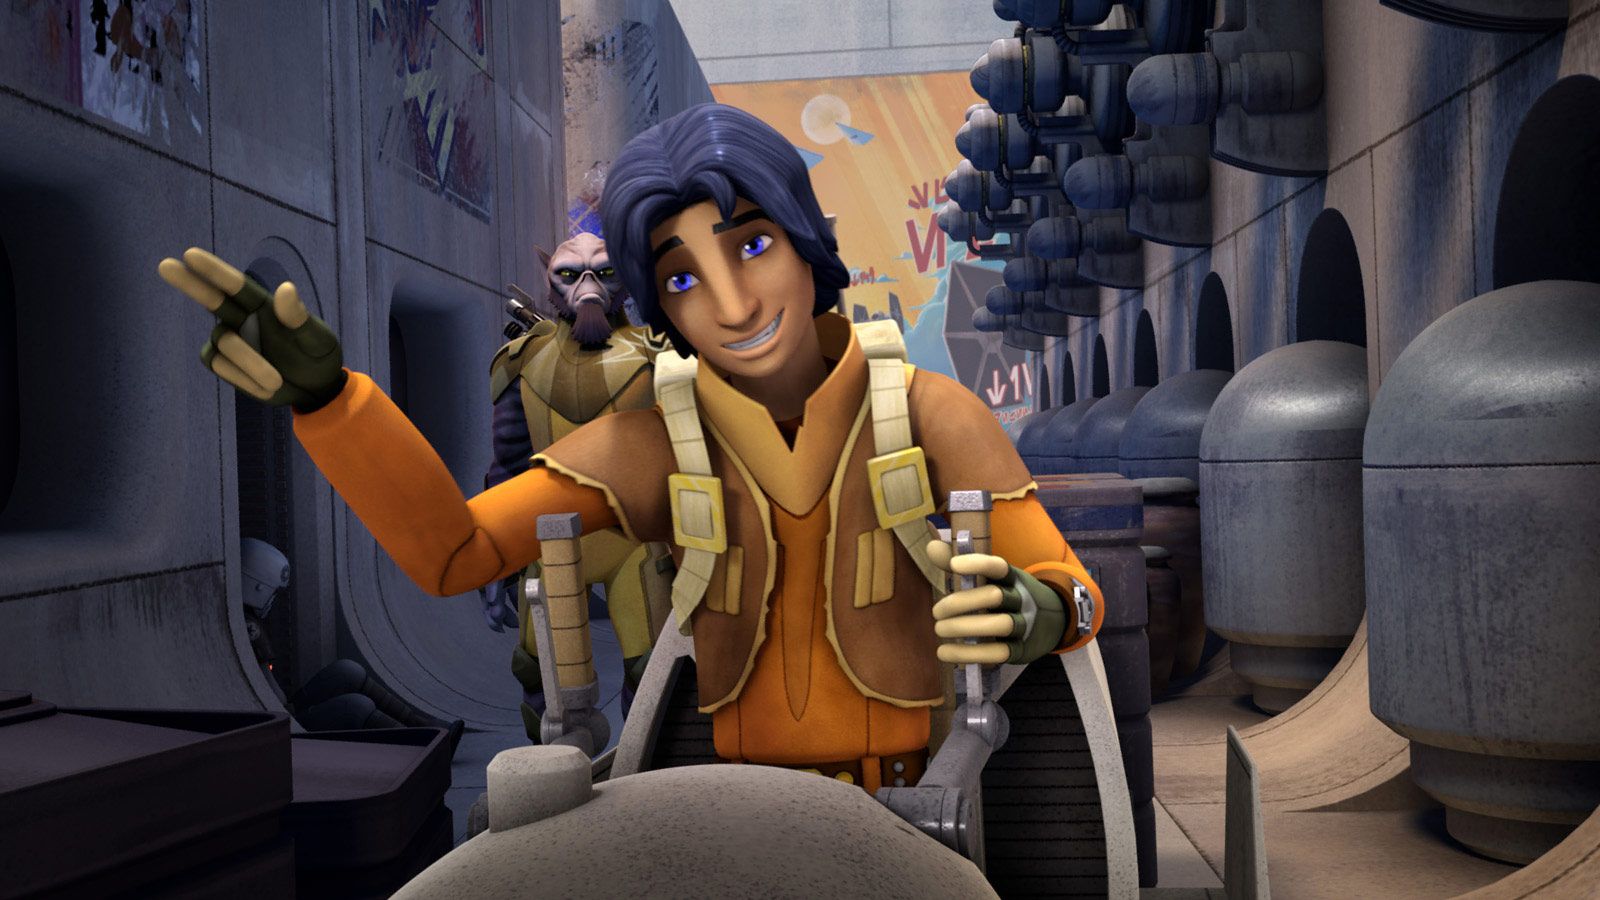 What To Do While Star Wars Rebels Is In The Off Season